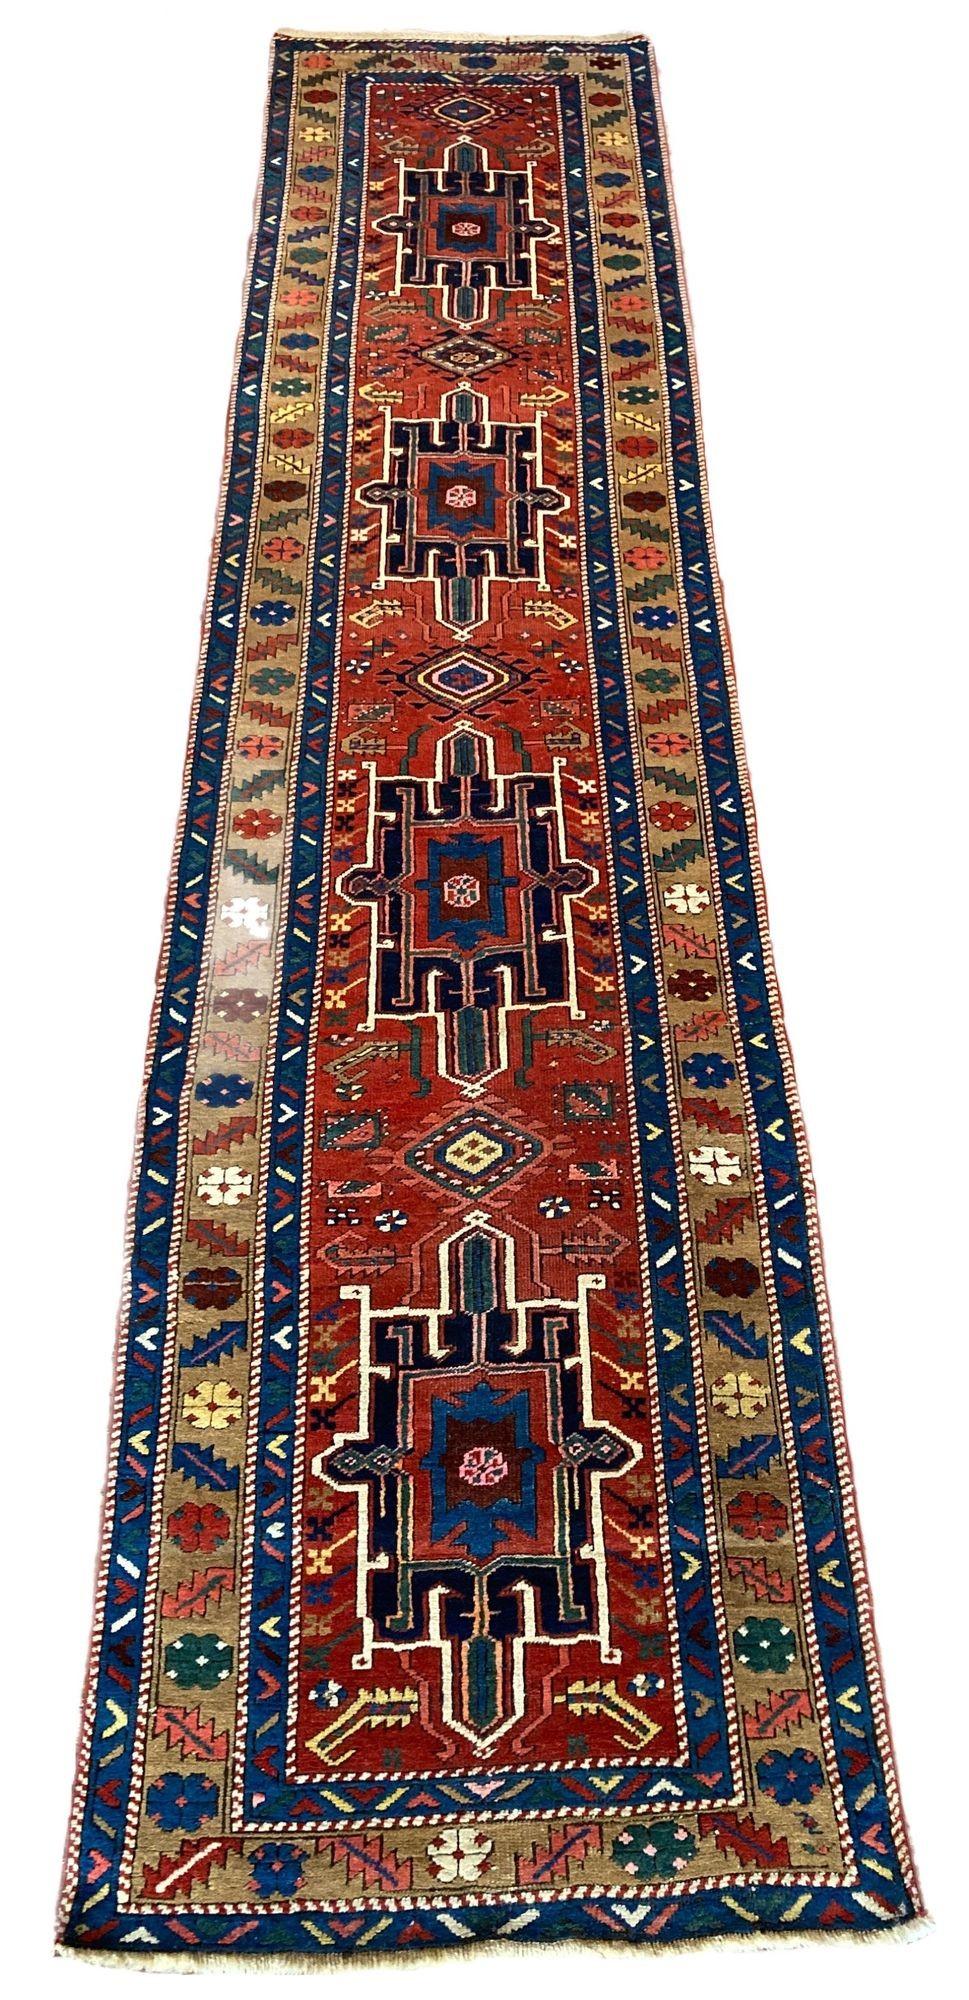 A beautiful antique Heriz runner, handwoven circa 1910. The design features four indigo medallions on a rich terracotta field and interesting camel border. Some very funky secondary colours of green, pink and gold!
Size: 4.18m x 0.96m (13ft 8in x